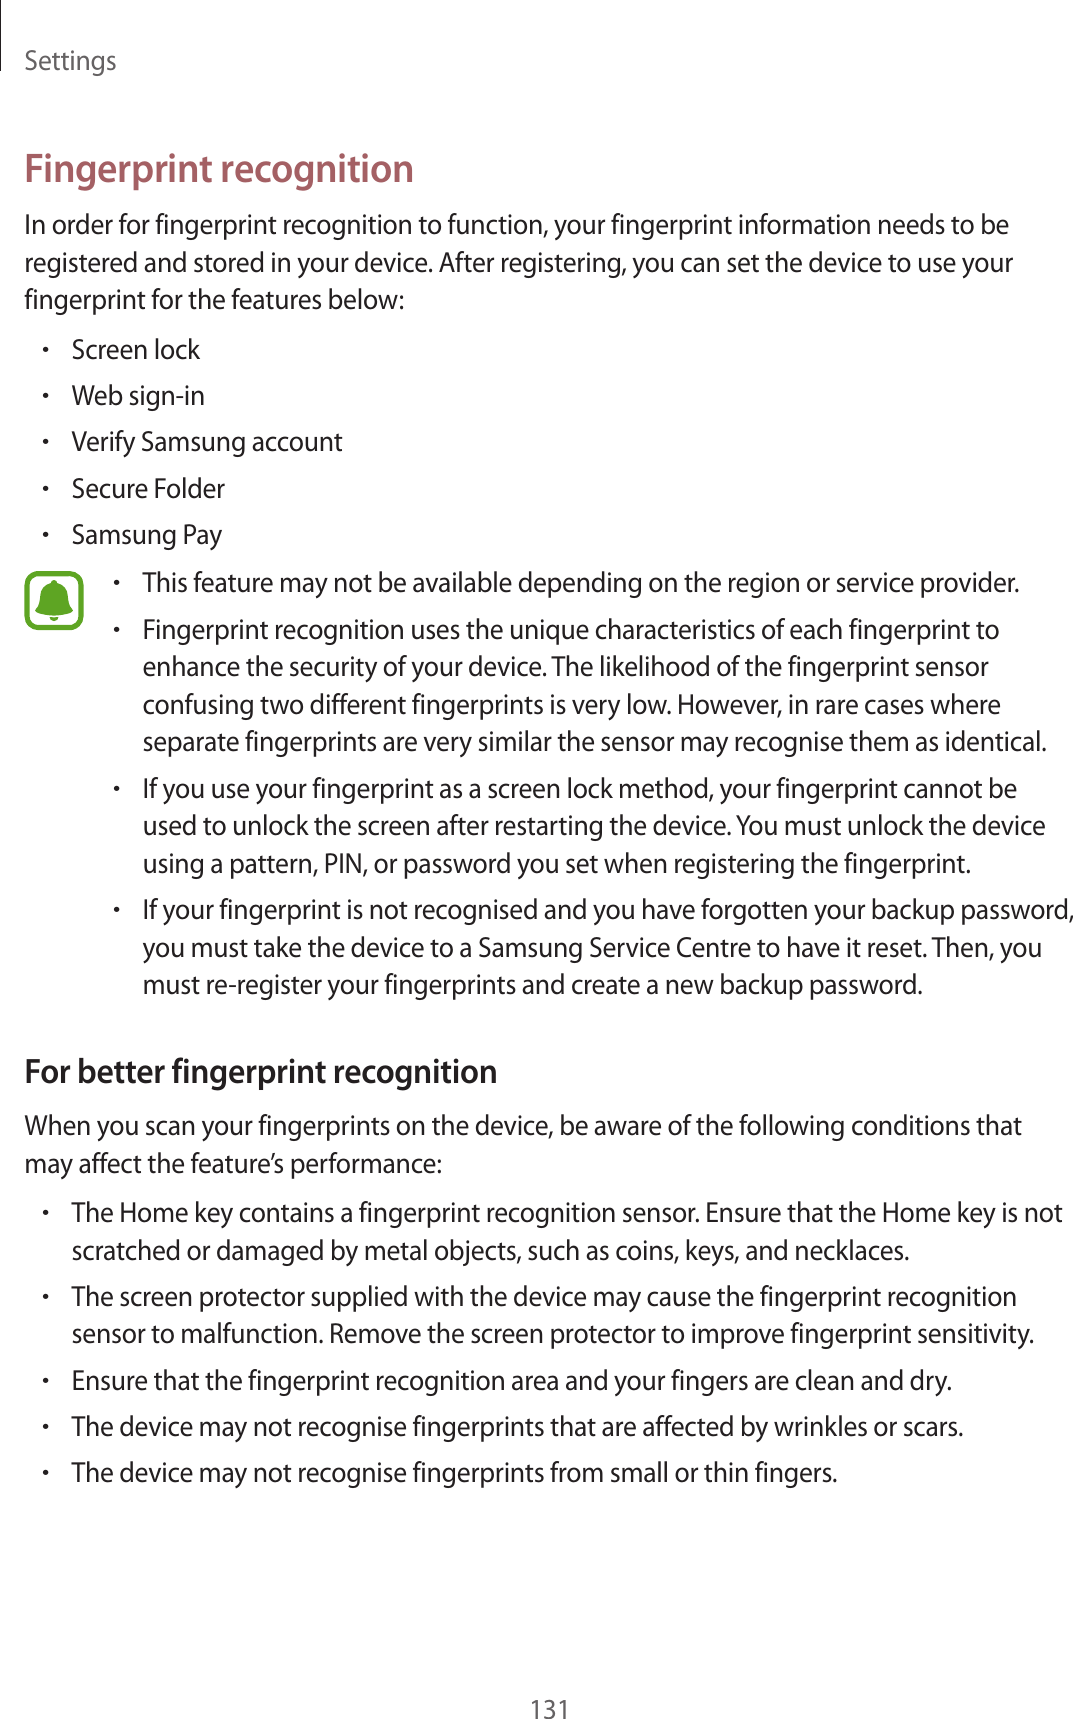 Settings131Fingerprint recognitionIn order for fingerprint recognition to function, your fingerprint information needs to be registered and stored in your device. After registering, you can set the device to use your fingerprint for the features below:•Screen lock•Web sign-in•Verify Samsung account•Secure Folder•Samsung Pay•This feature may not be available depending on the region or service provider.•Fingerprint recognition uses the unique characteristics of each fingerprint to enhance the security of your device. The likelihood of the fingerprint sensor confusing two different fingerprints is very low. However, in rare cases where separate fingerprints are very similar the sensor may recognise them as identical.•If you use your fingerprint as a screen lock method, your fingerprint cannot be used to unlock the screen after restarting the device. You must unlock the device using a pattern, PIN, or password you set when registering the fingerprint.•If your fingerprint is not recognised and you have forgotten your backup password, you must take the device to a Samsung Service Centre to have it reset. Then, you must re-register your fingerprints and create a new backup password.For better fingerprint recognitionWhen you scan your fingerprints on the device, be aware of the following conditions that may affect the feature’s performance:•The Home key contains a fingerprint recognition sensor. Ensure that the Home key is not scratched or damaged by metal objects, such as coins, keys, and necklaces.•The screen protector supplied with the device may cause the fingerprint recognition sensor to malfunction. Remove the screen protector to improve fingerprint sensitivity.•Ensure that the fingerprint recognition area and your fingers are clean and dry.•The device may not recognise fingerprints that are affected by wrinkles or scars.•The device may not recognise fingerprints from small or thin fingers.